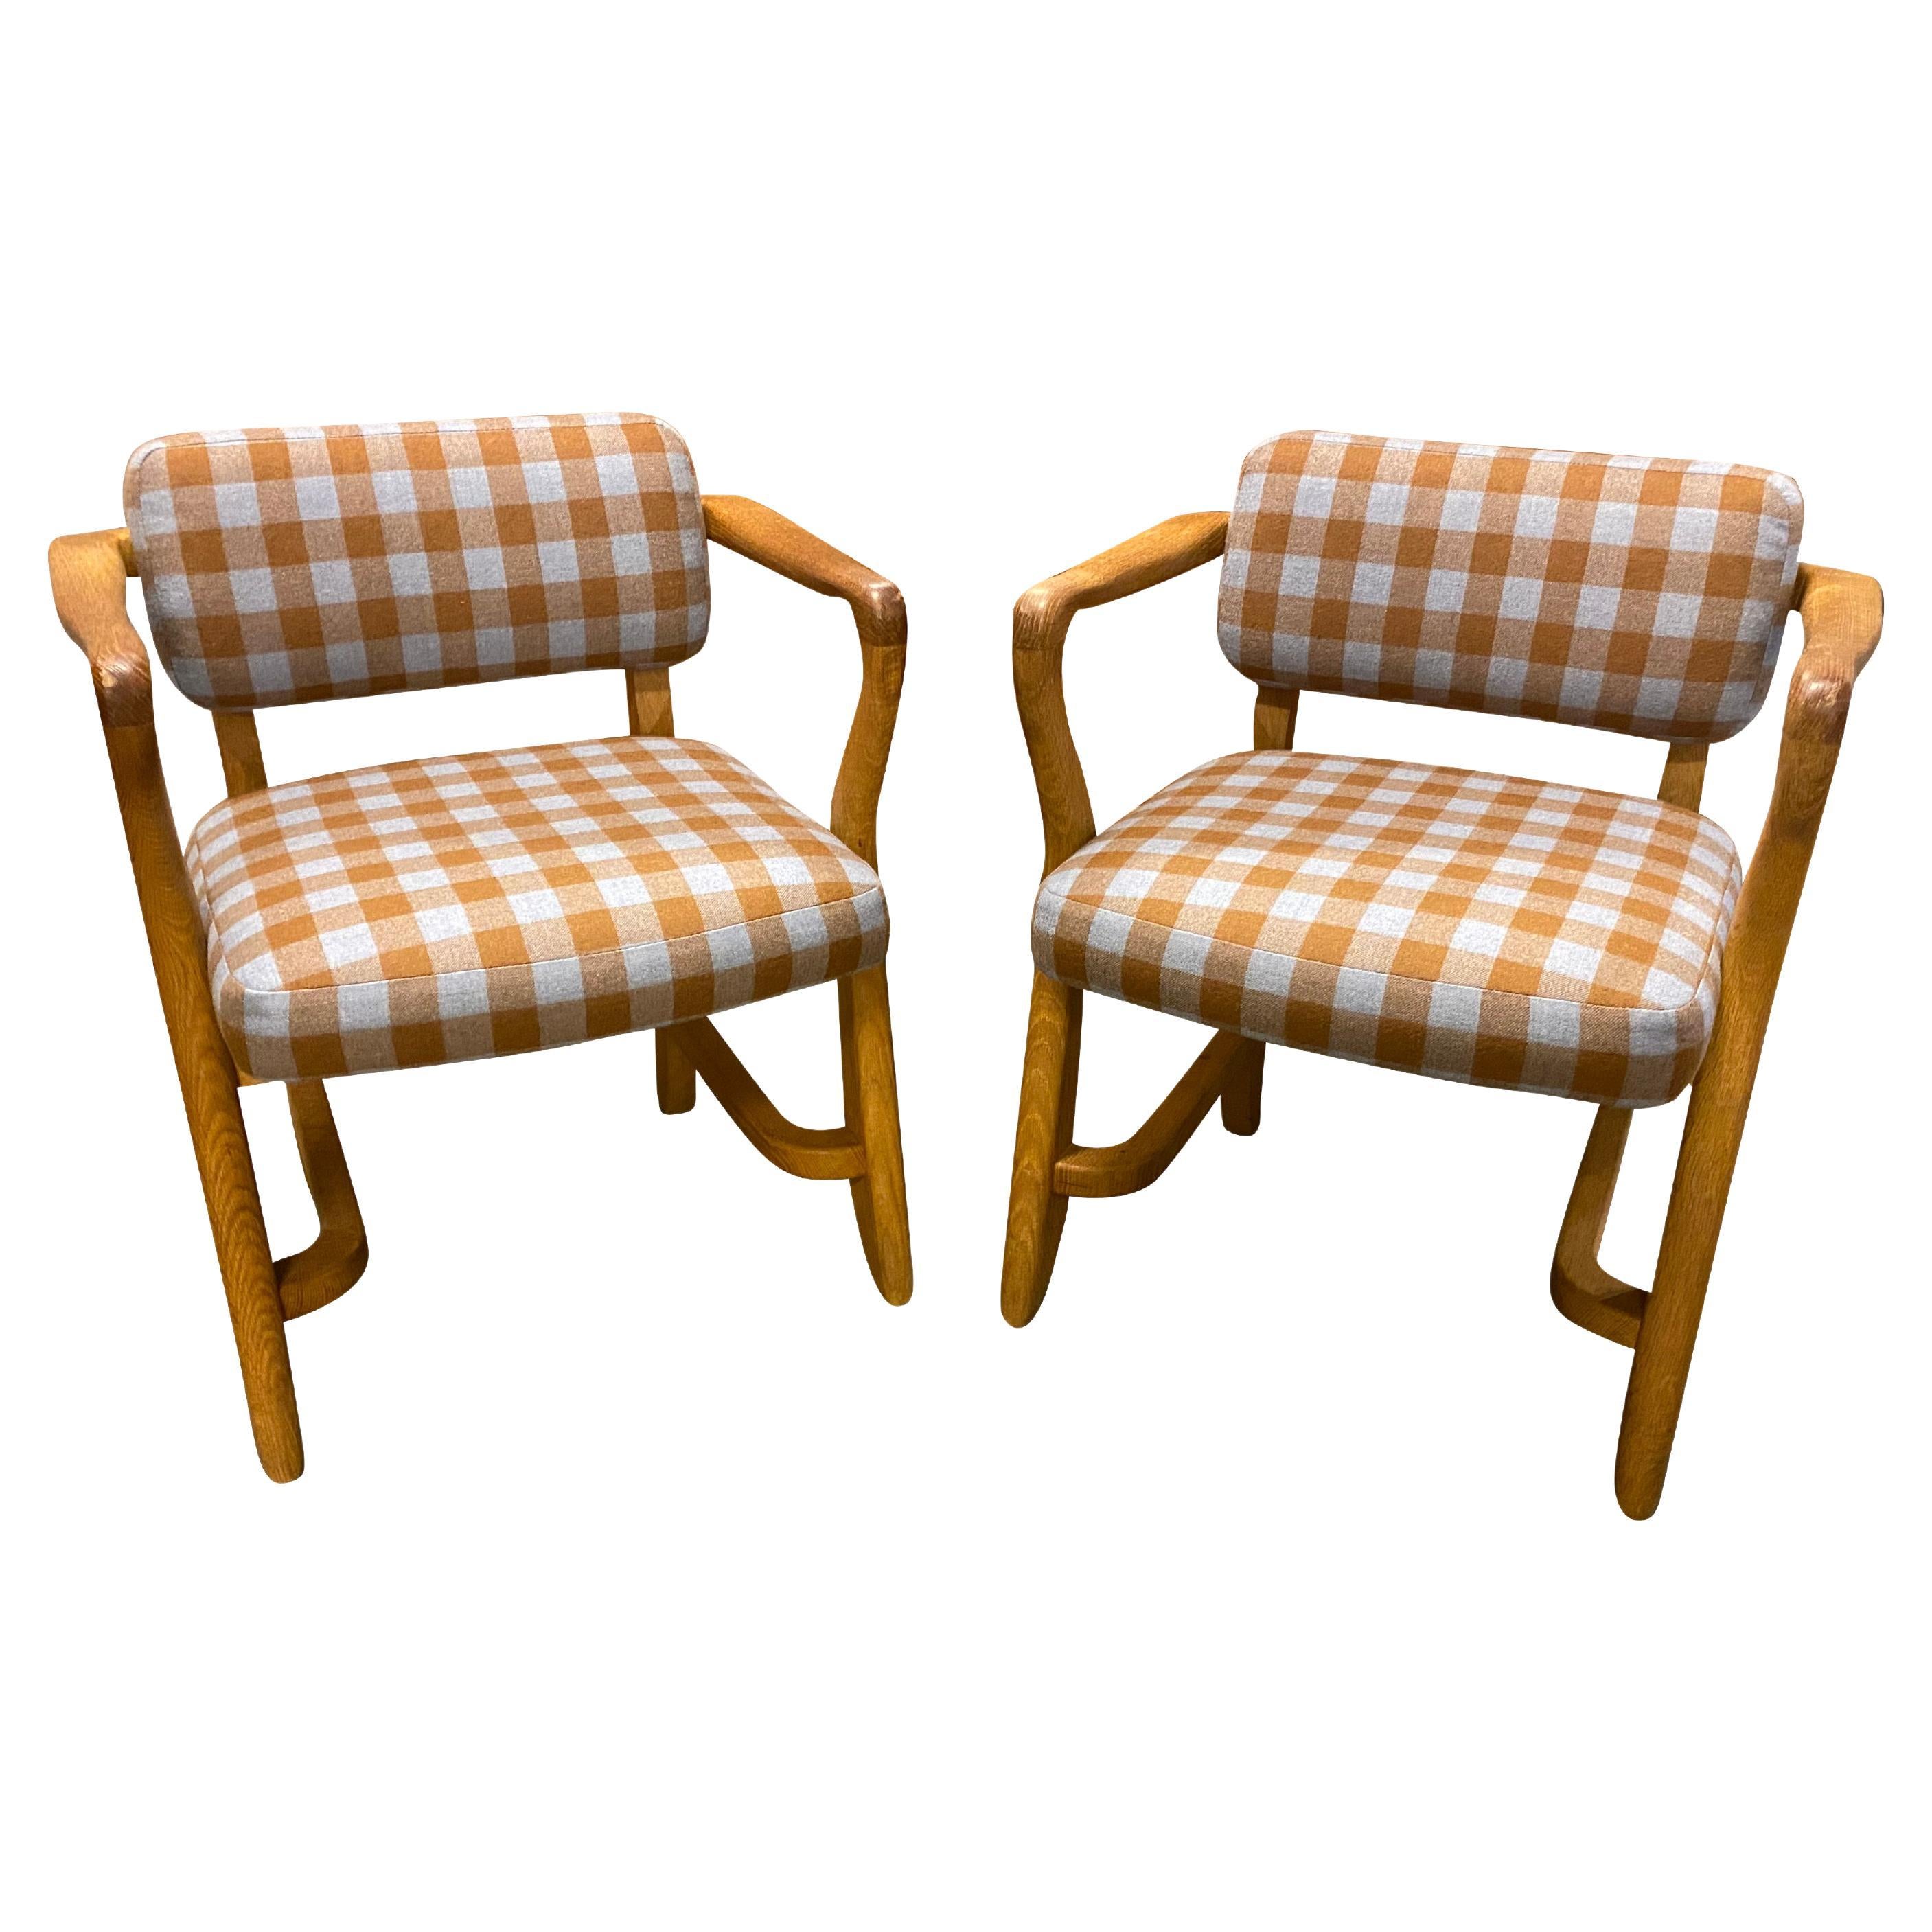 Pair of Guillerme & Chambron Armchairs, France, 1950's